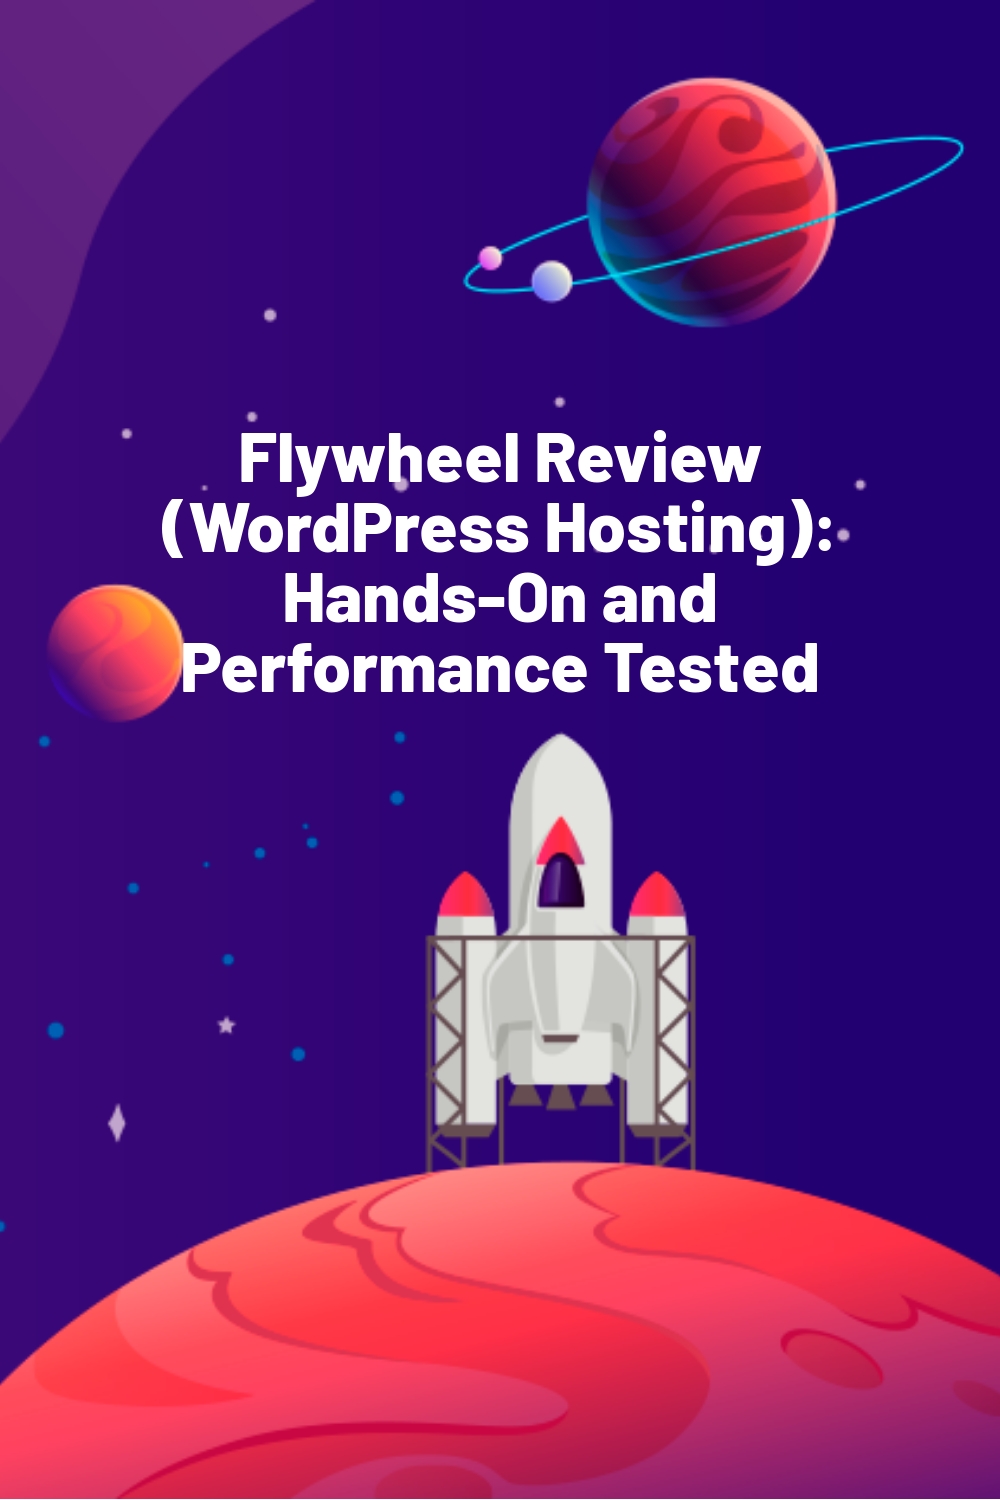 Flywheel Review (WordPress Hosting): Hands-On and Performance Tested